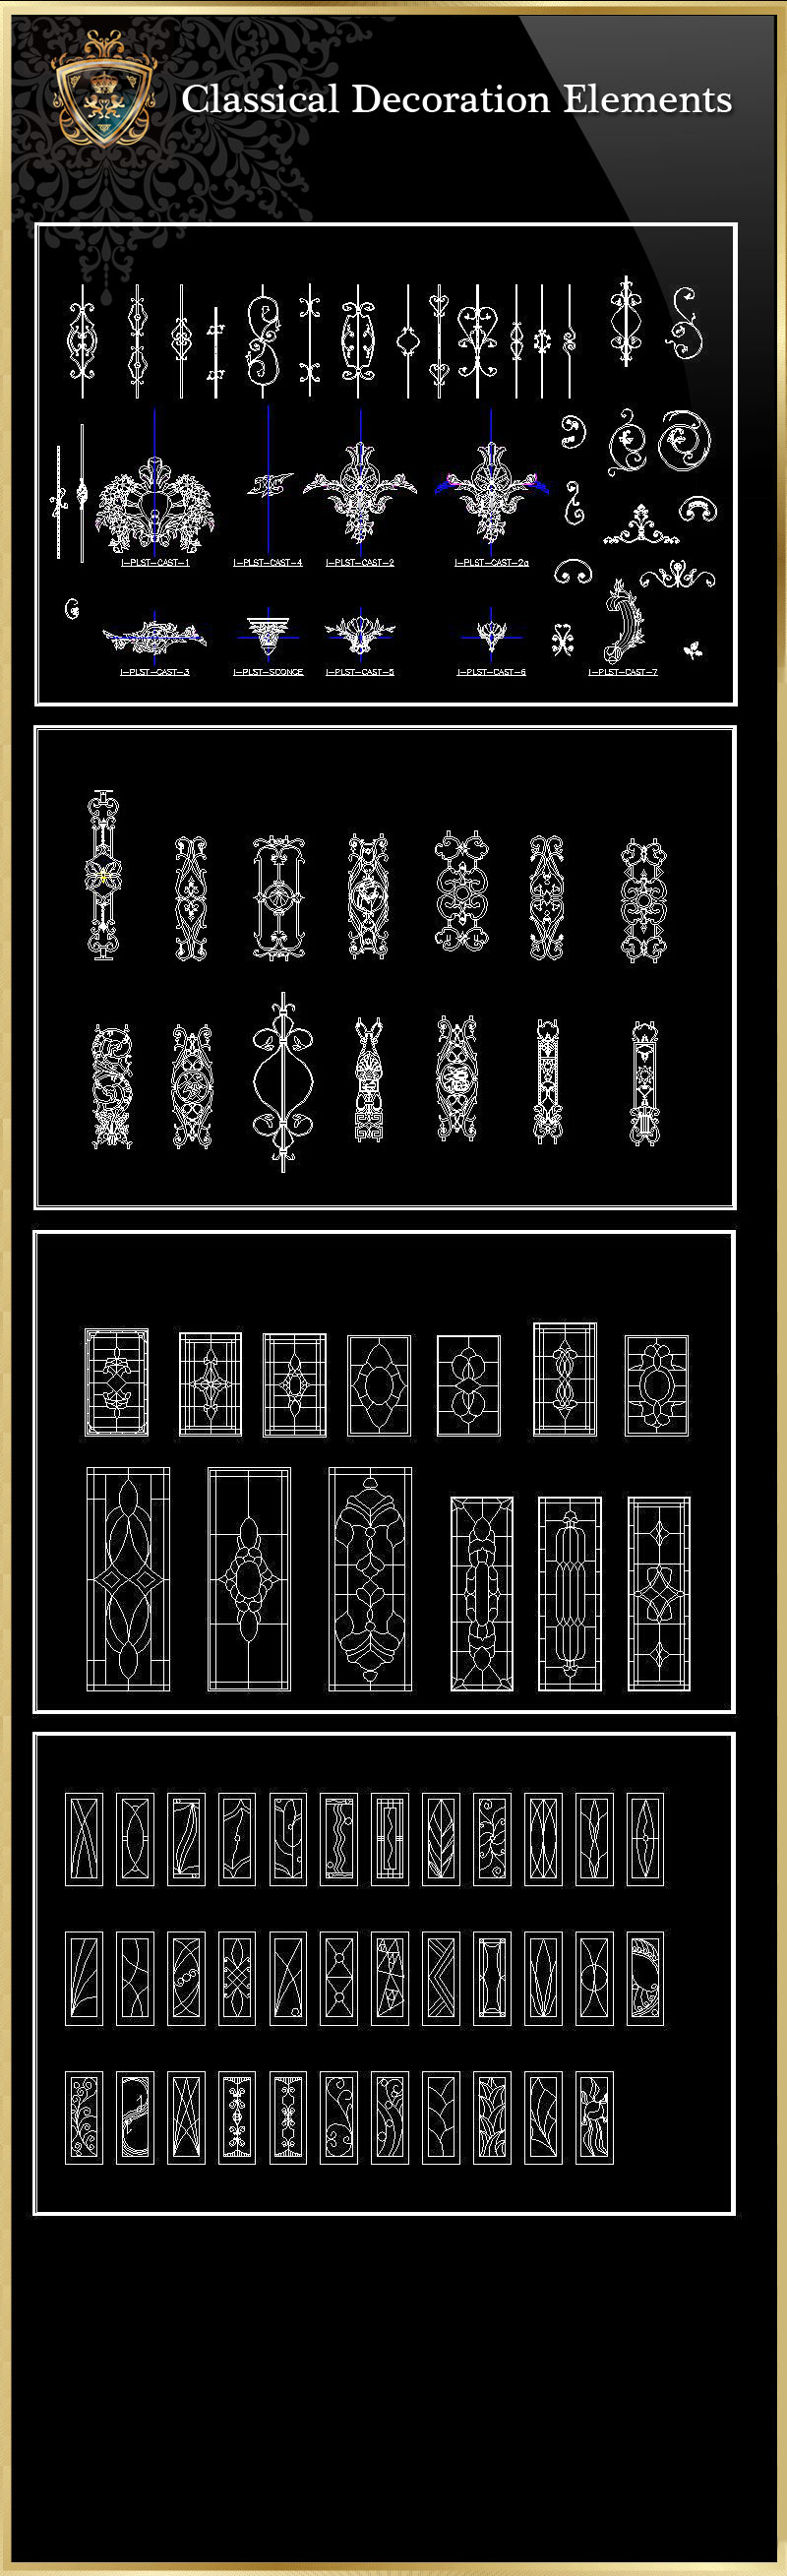 ★【Classical Decoration Elements 02】Luxury home, Luxury Villas, Luxury Palace, Architecture Ornamental Parts, Decorative Inserts & Accessories, Handrail & Stairway Parts, Outdoor House Accessories, Euro Architectural Components, Arcade